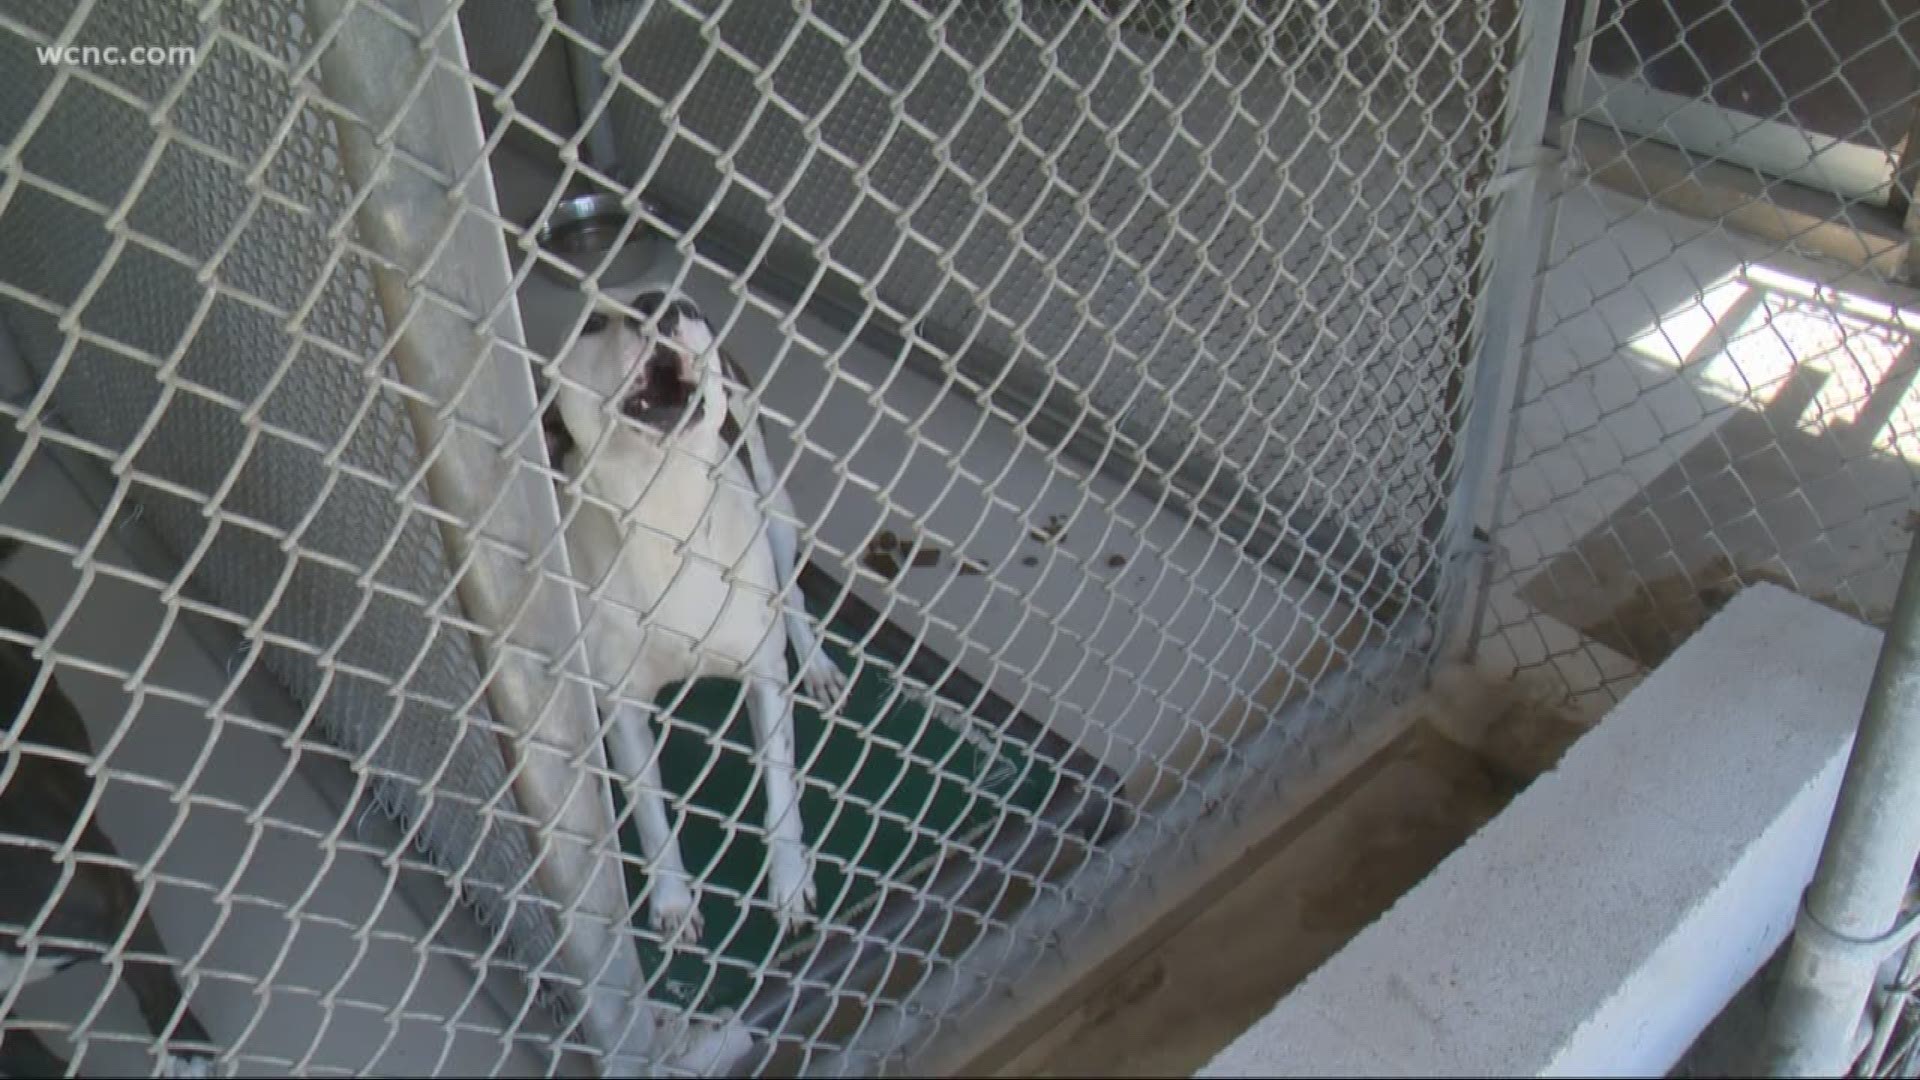 To avoid the worst case scenario, staff at Gaston County Animal Care and Enforcement have to work around the clock.